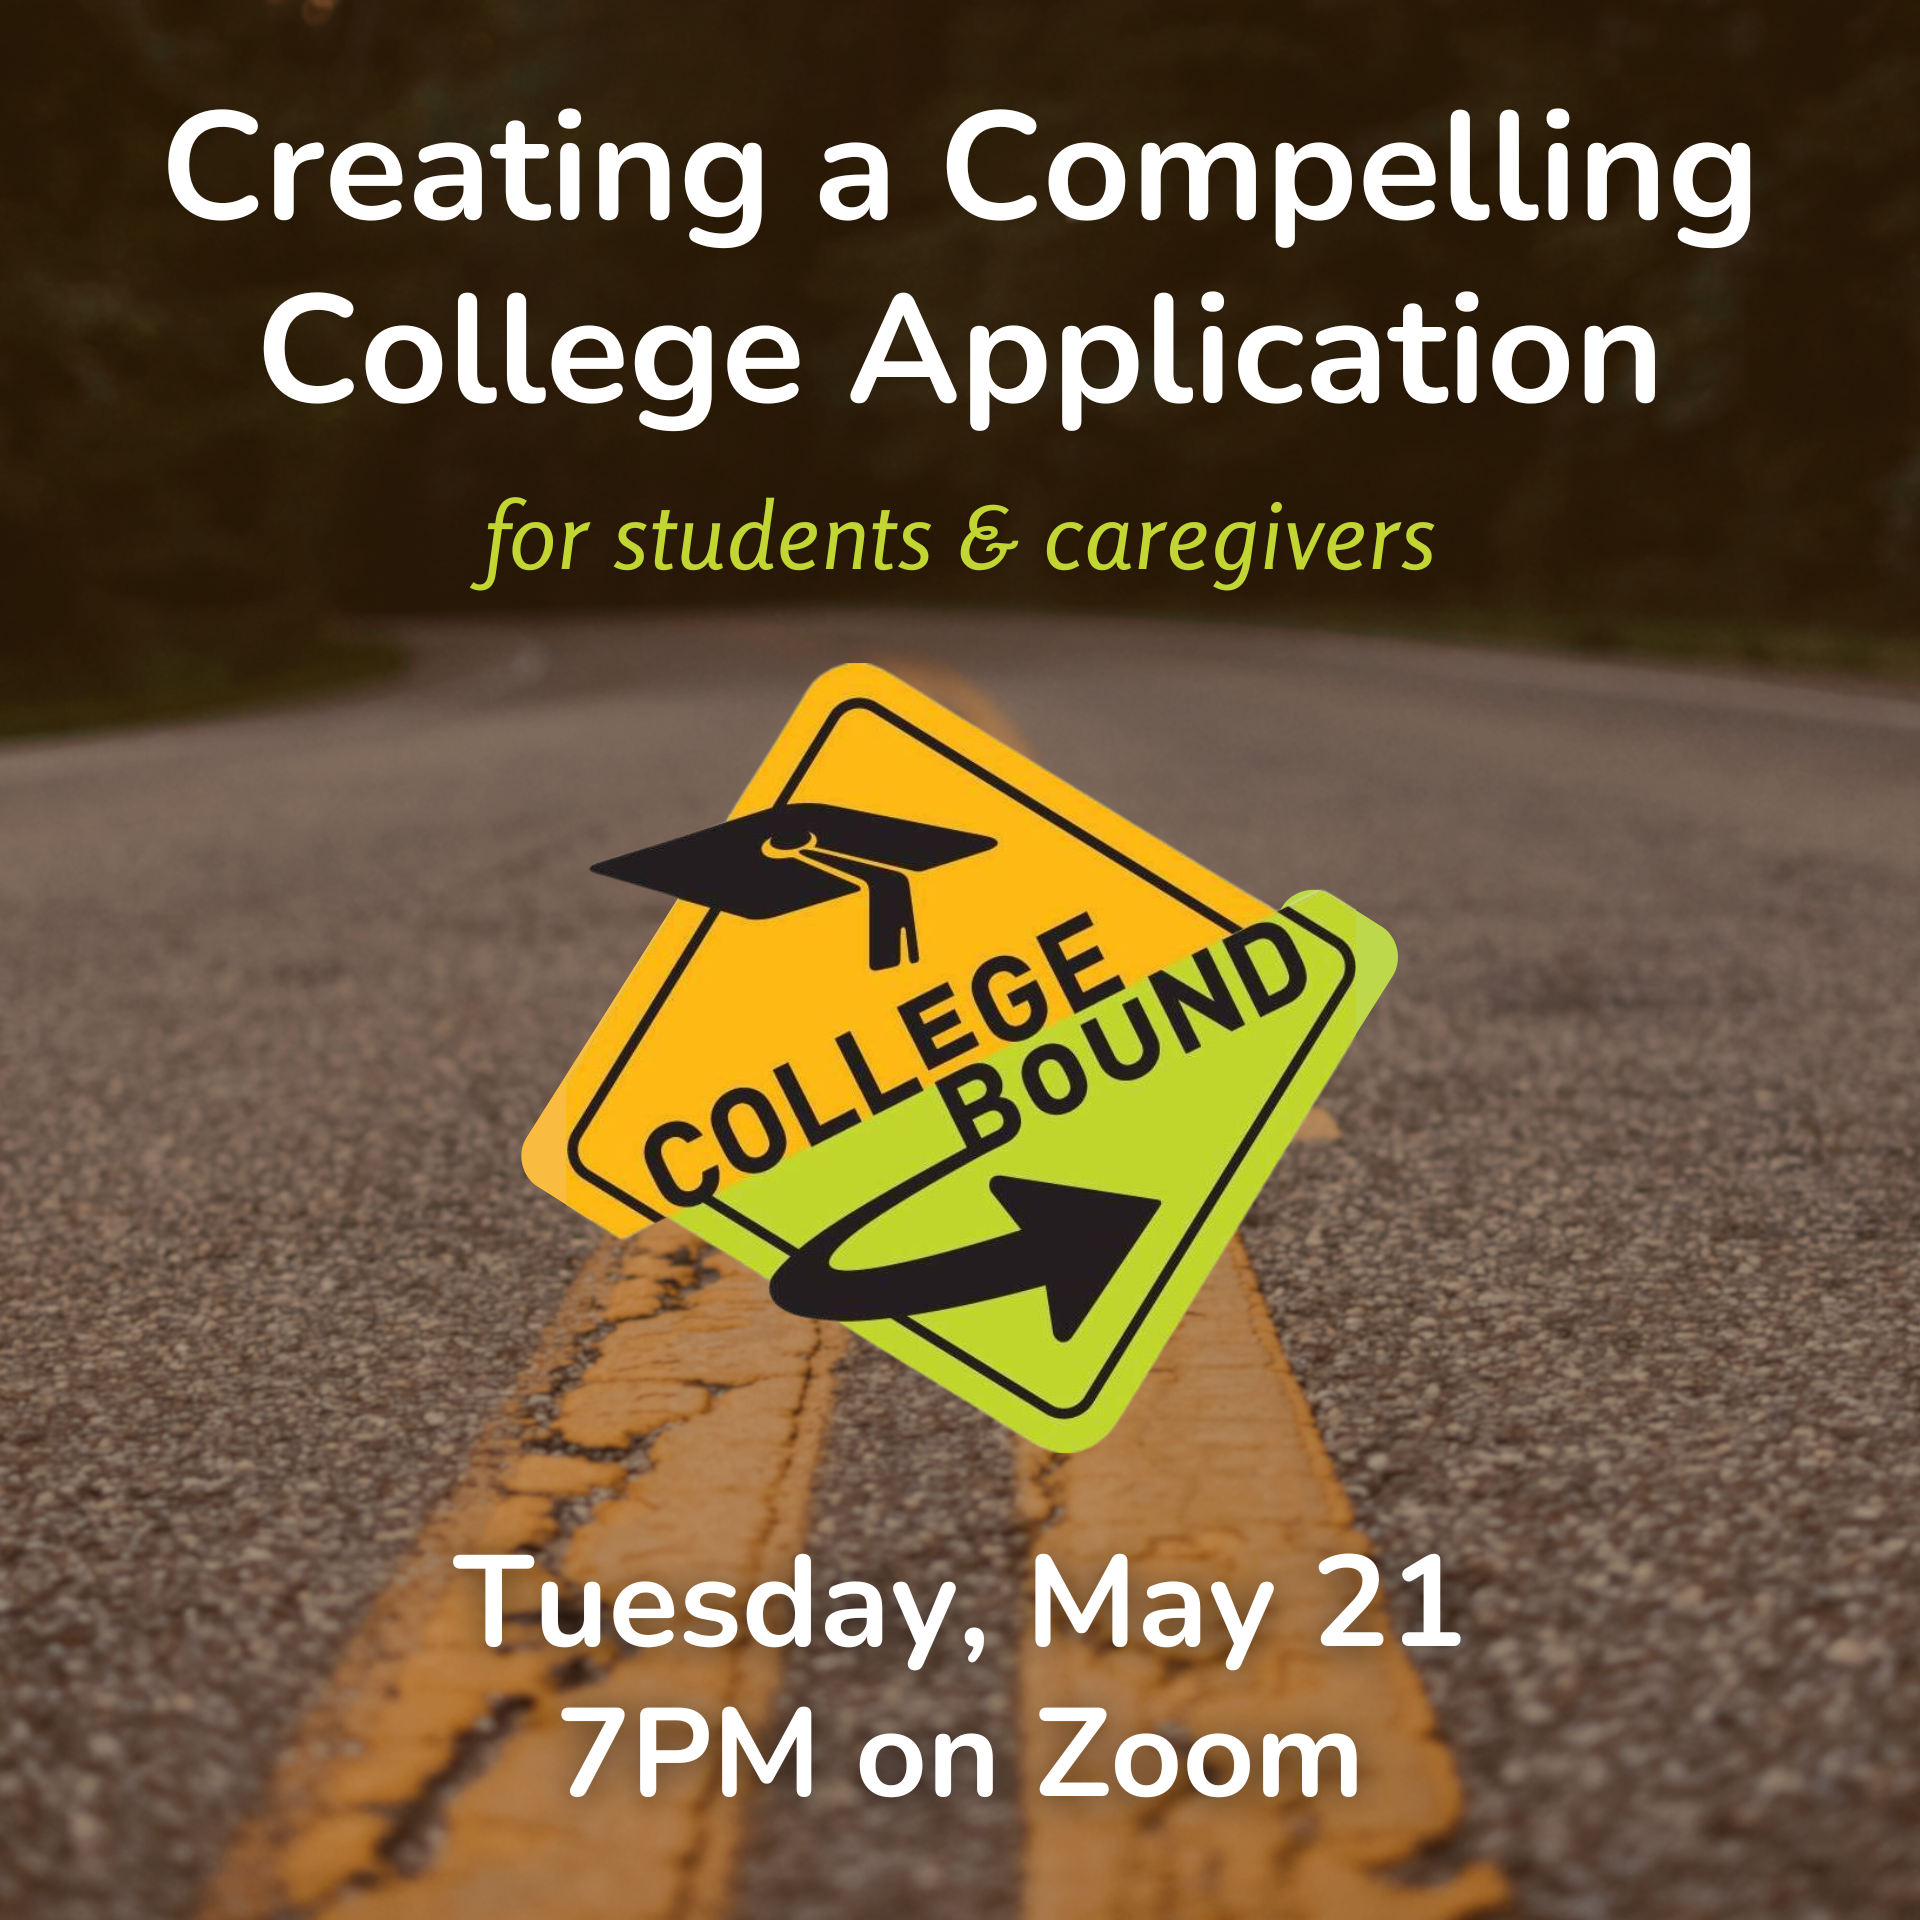 Graphic for Creating a Compelling College Application for students and caregivers wtih CollegeBound logo and background image of a curving road.